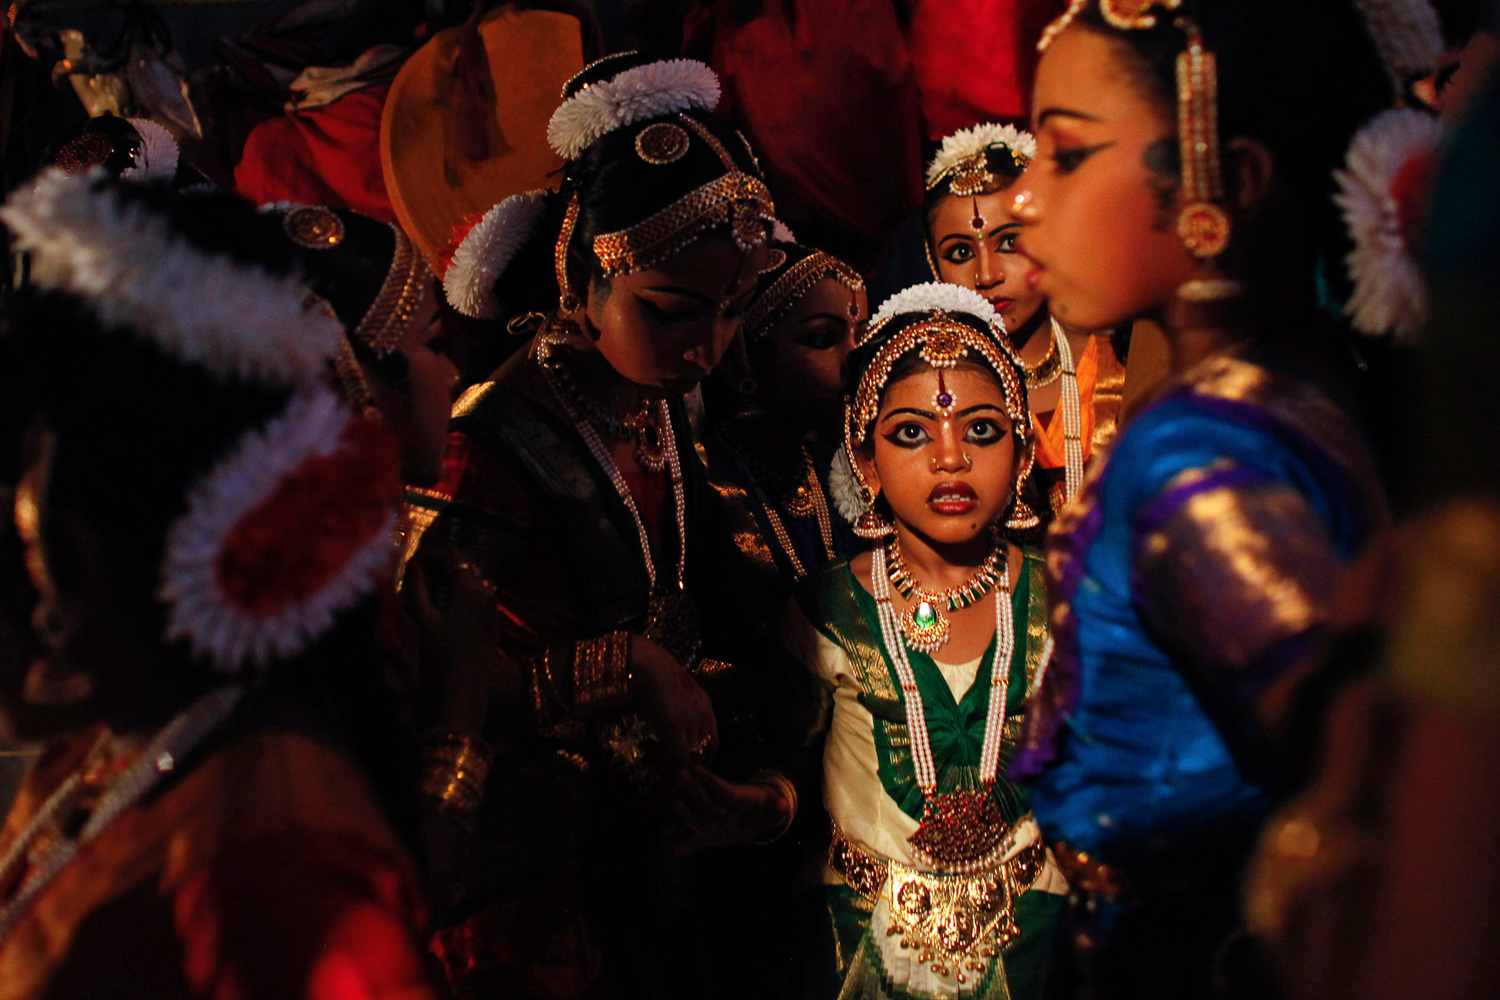 Feb. 20, 2012. Schoolgirls wait backstage before a performance of Indian classical dance on the occasion of the Mahashivratri festival in Thiruvananthapuram, capital of the southern Indian state of Kerala.